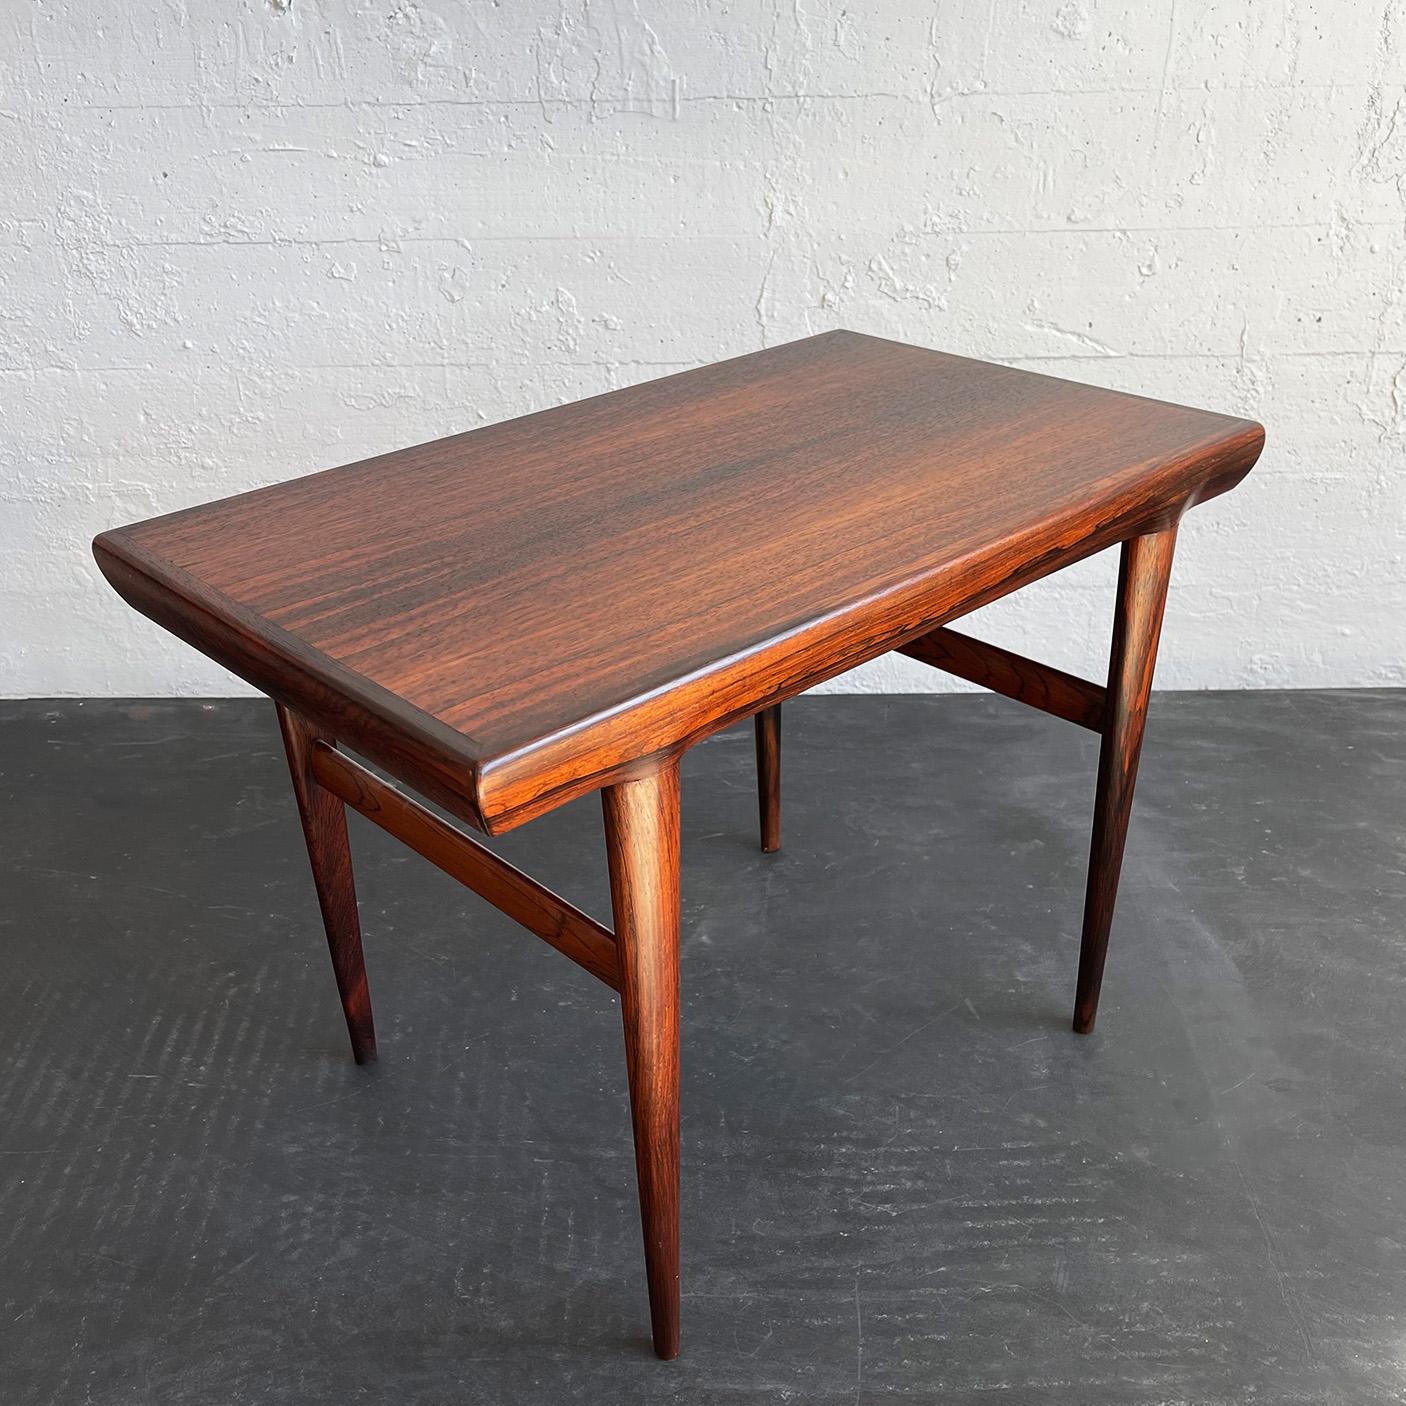 Elegant, Scandinvian modern, Brazilian rosewood, side table designed by Johannes Andersen for CFC Silkeborg, Denmark features a rounded, organic profile with slender tapered legs. 